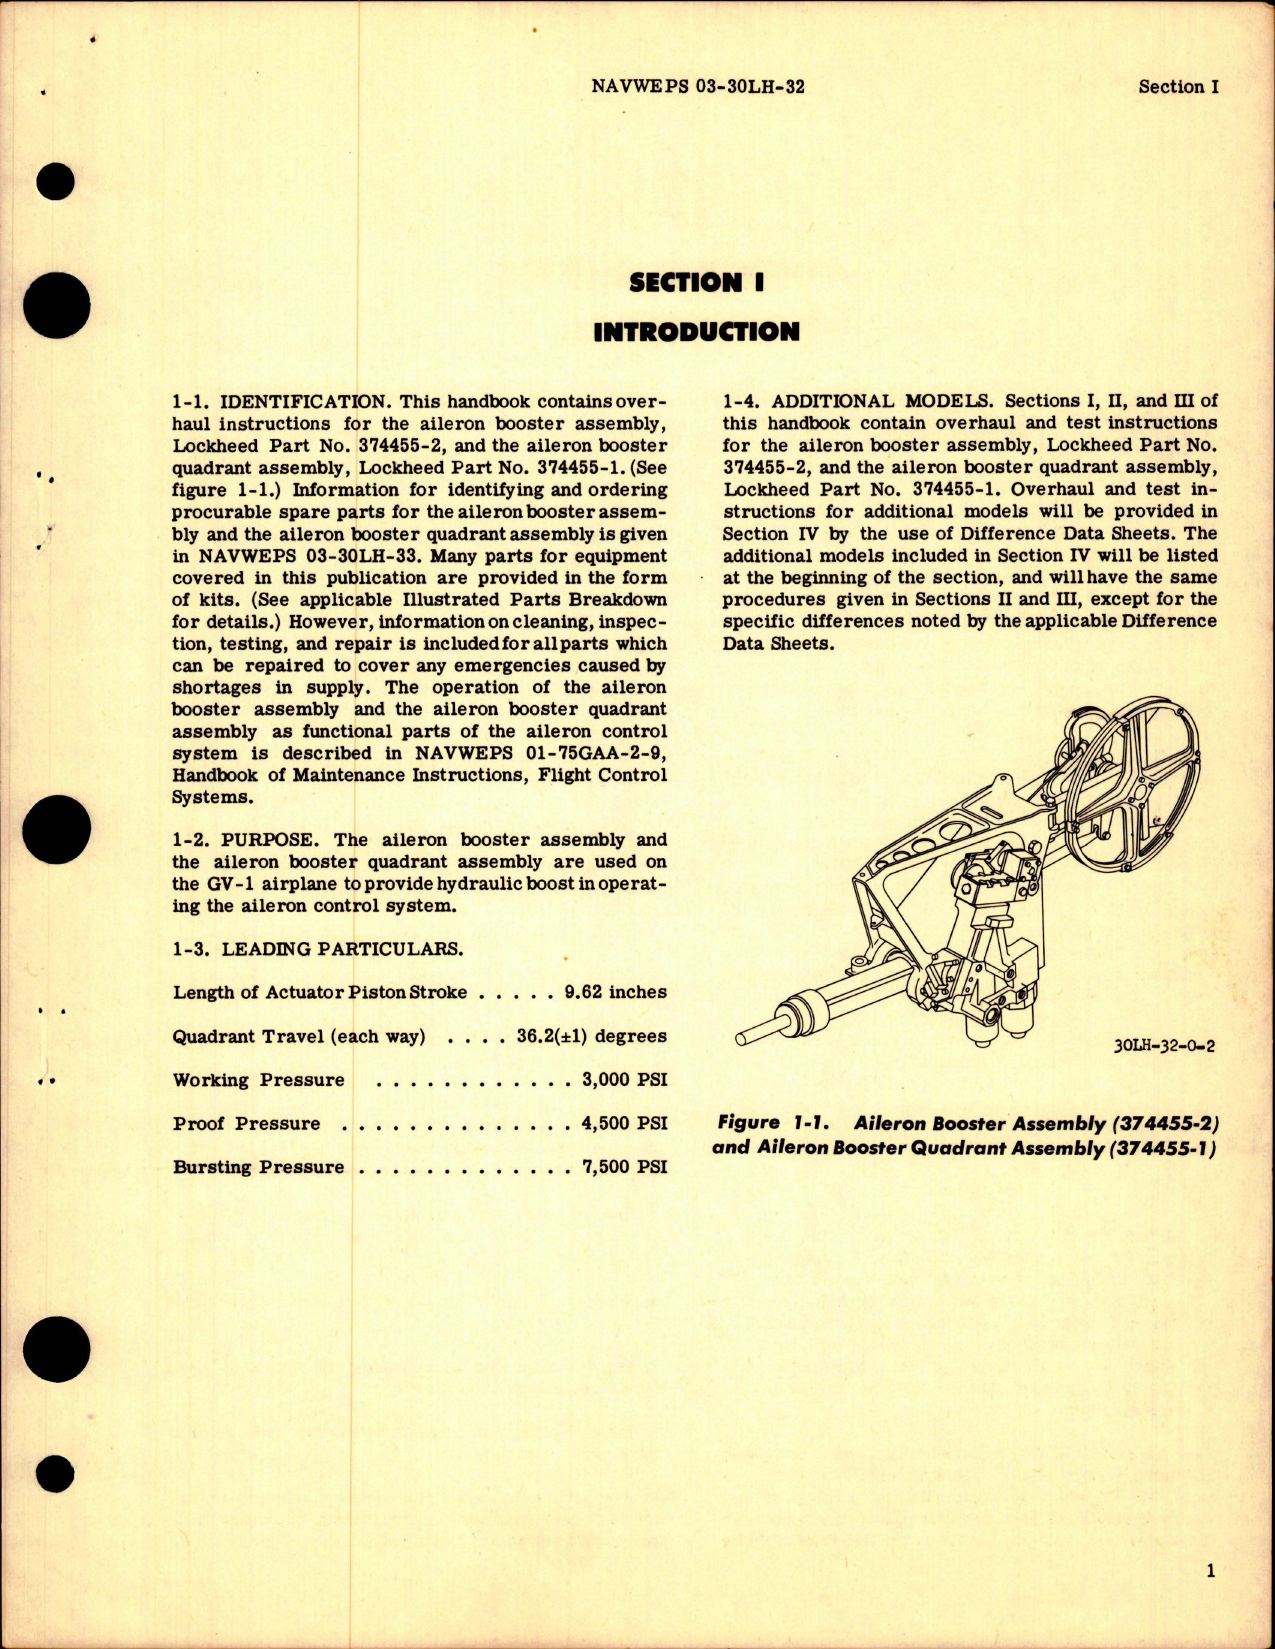 Sample page 5 from AirCorps Library document: Overhaul Instructions for Aileron Booster Assembly and Aileron Booster Quadrant Assembly